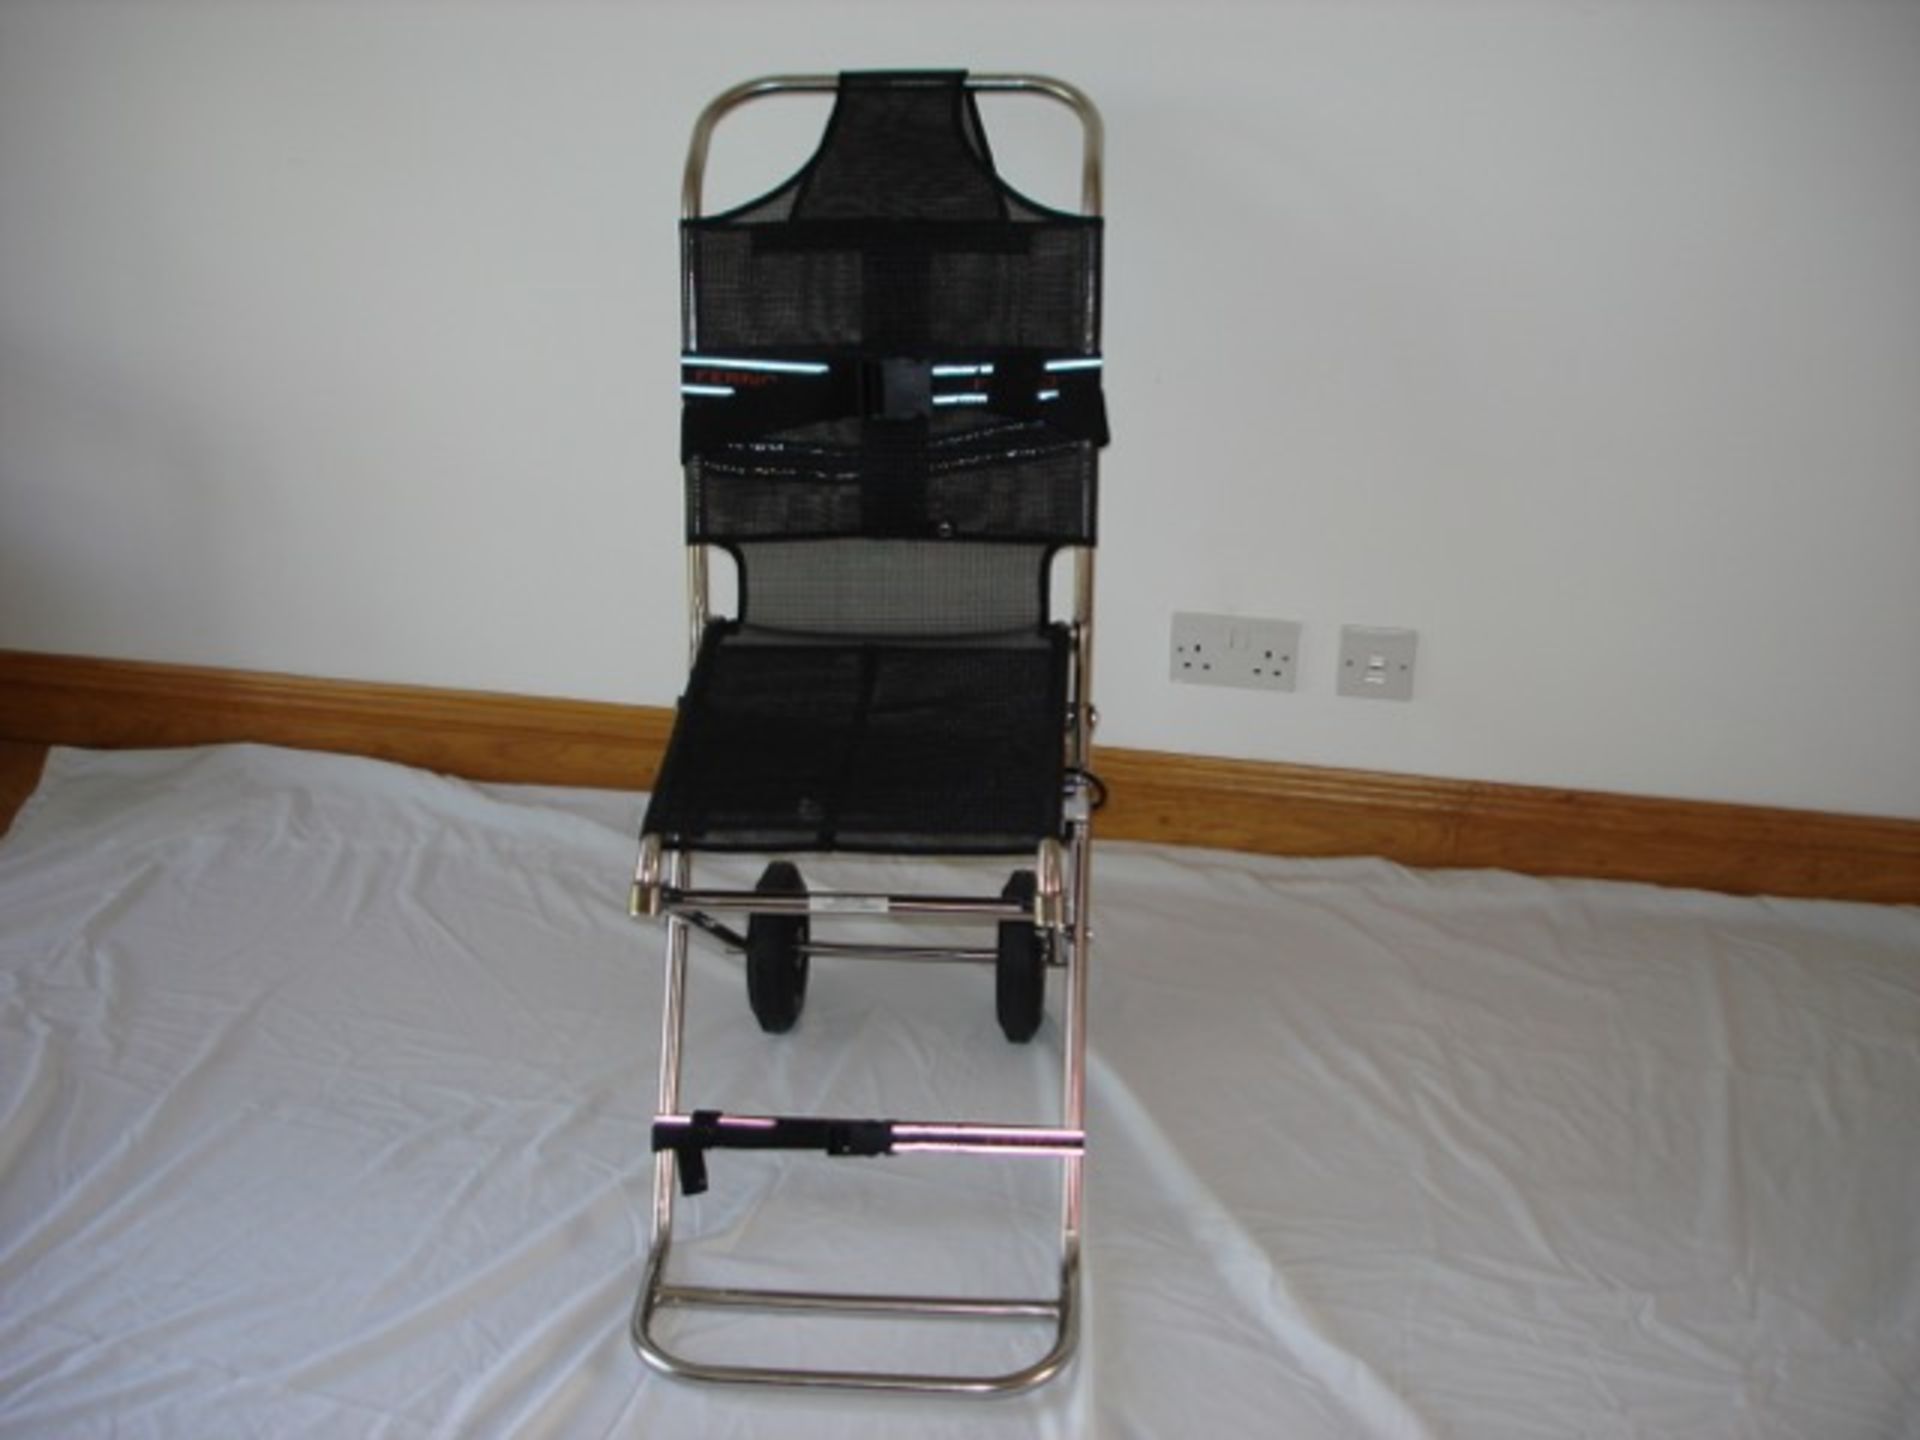 1x FERNO DECON COMPACT 1 PATIENT CARRY CHAIR, new, never used still in box. ideal for nursing homes,